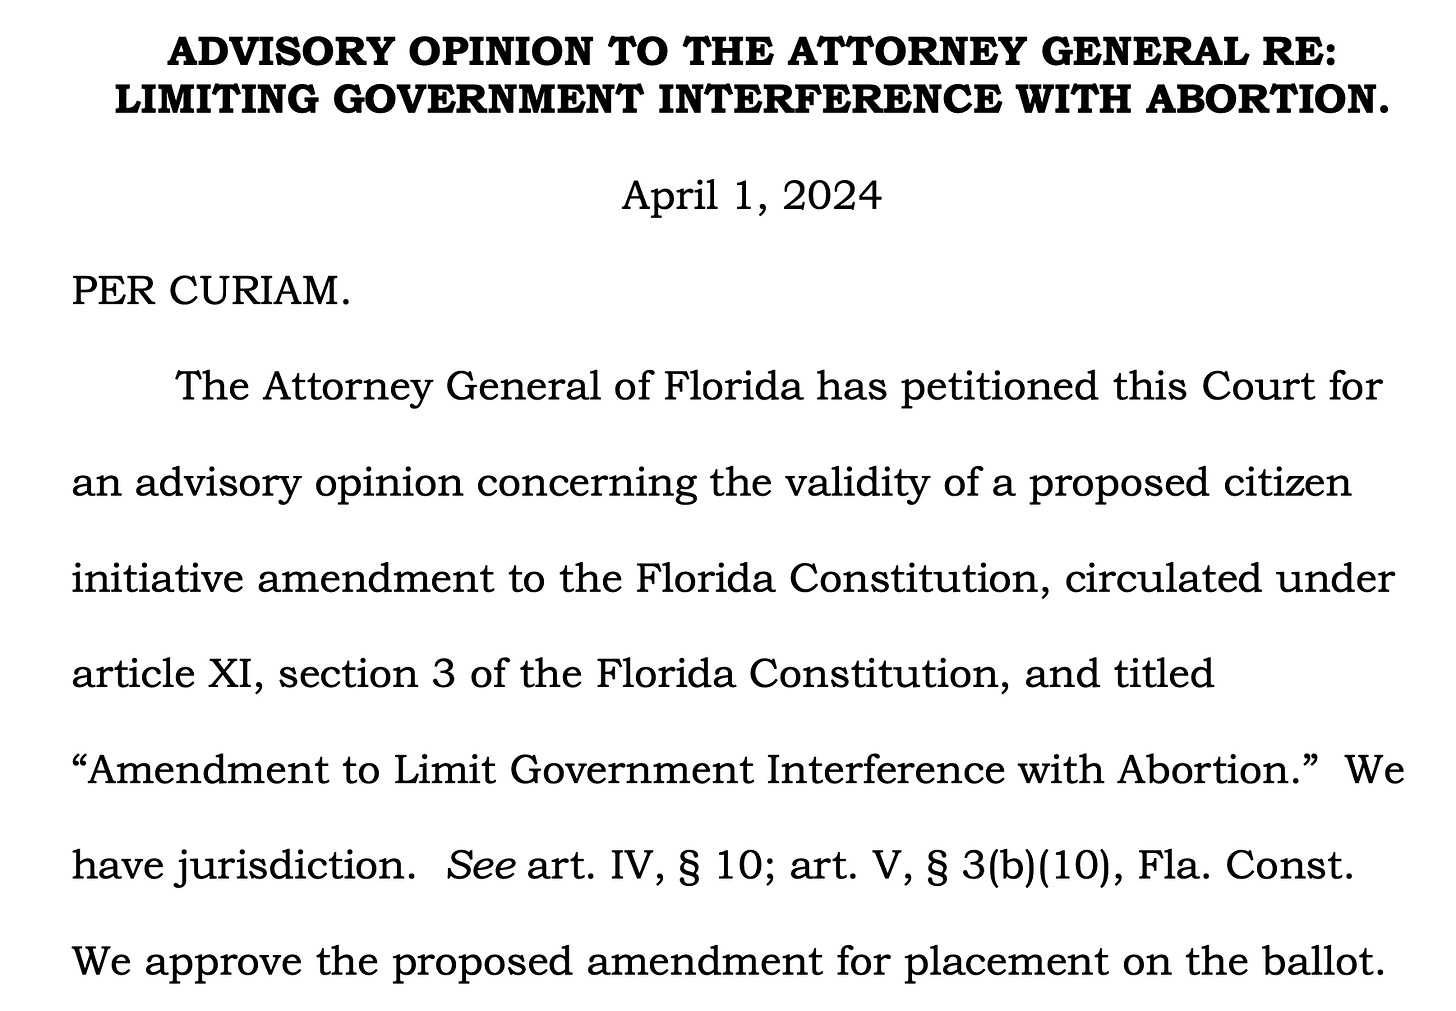 ADVISORY OPINION TO THE ATTORNEY GENERAL RE: LIMITING GOVERNMENT INTERFERENCE WITH ABORTION. April 1, 2024 PER CURIAM. The Attorney General of Florida has petitioned this Court for an advisory opinion concerning the validity of a proposed citizen initiative amendment to the Florida Constitution, circulated under article XI, section 3 of the Florida Constitution, and titled “Amendment to Limit Government Interference with Abortion.” We have jurisdiction. See art. IV, § 10; art. V, § 3(b)(10), Fla. Const. We approve the proposed amendment for placement on the ballot.